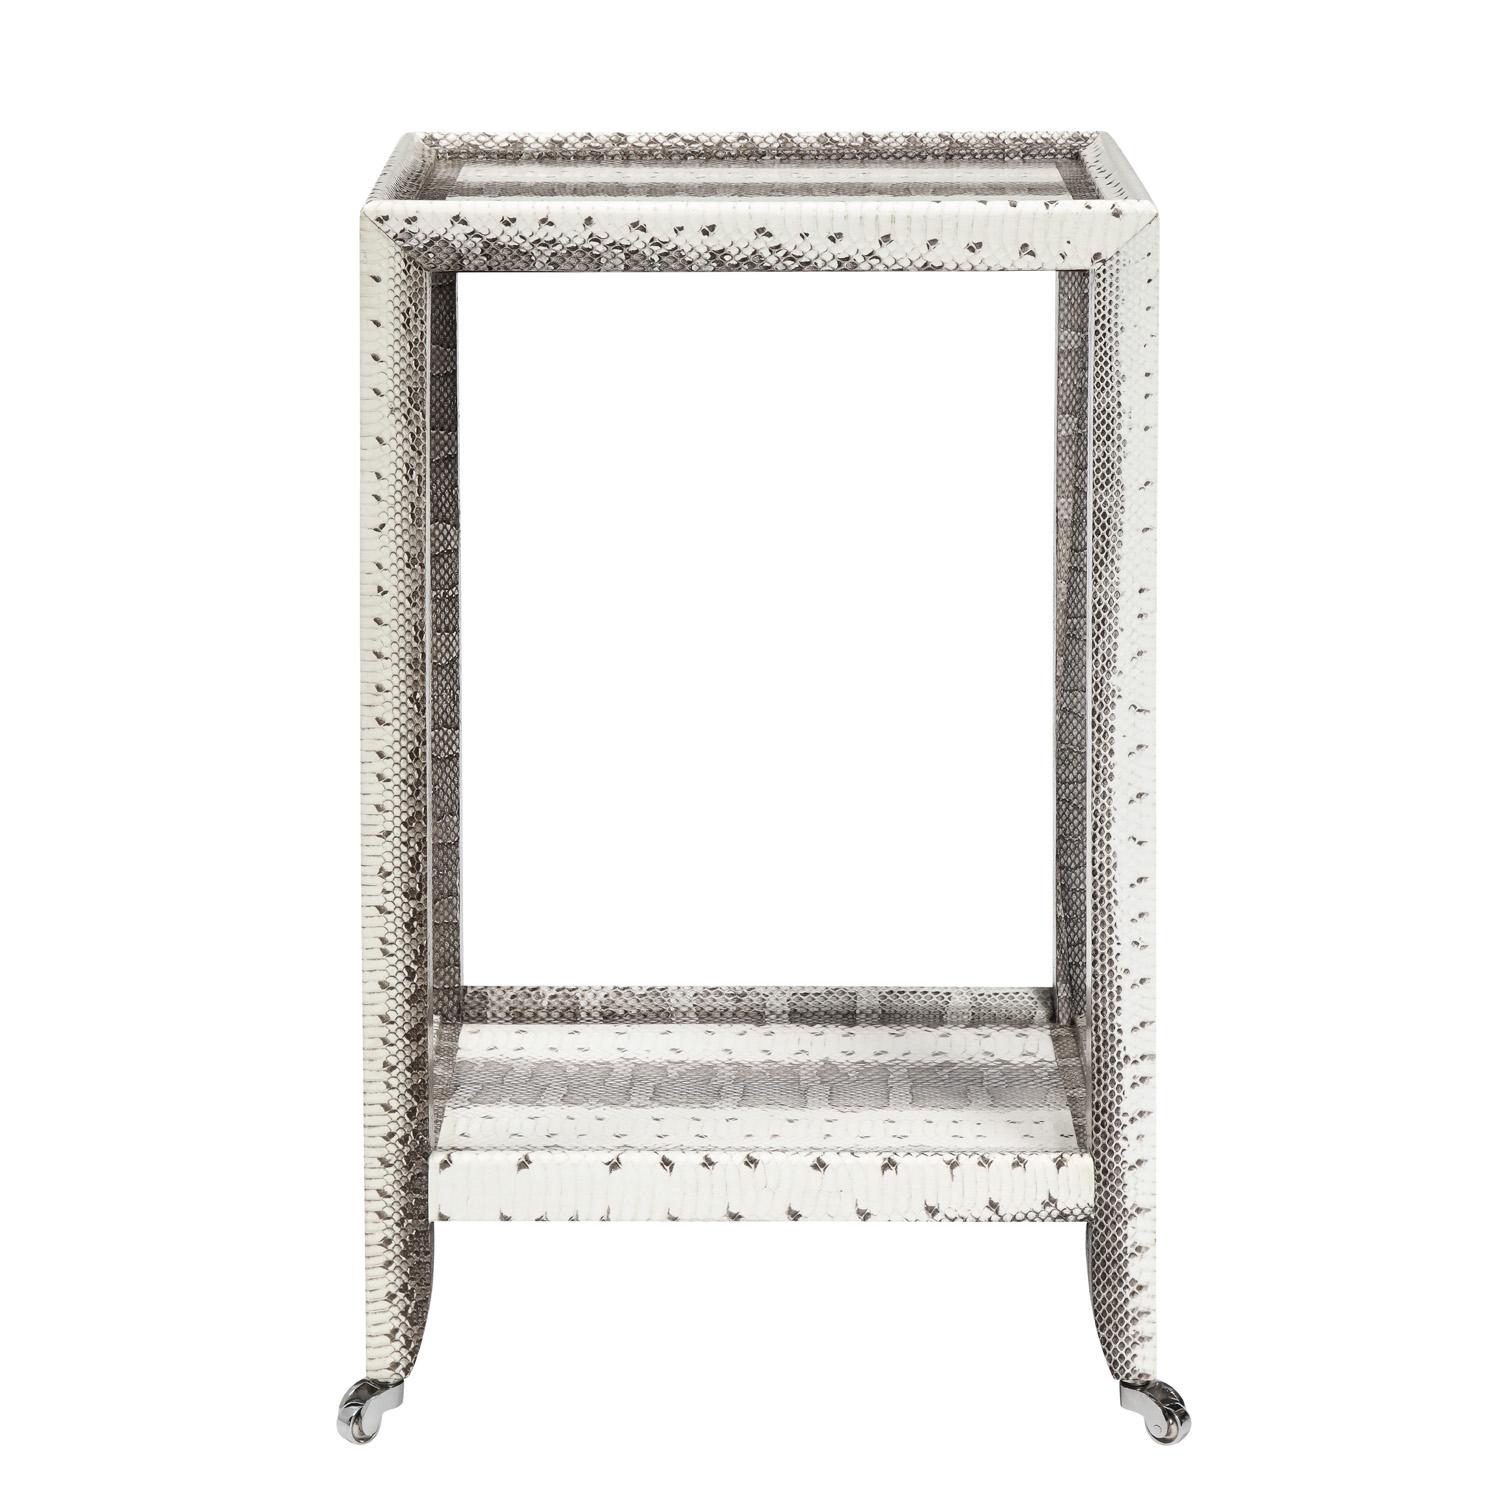 Elegant tall Telephone Table style side table covered in exotic snake skin with moire silk on undersides of table by Evan Lobel for Lobel Originals, 2022. Meticulously crafted, this table is a stunning accent in any room.